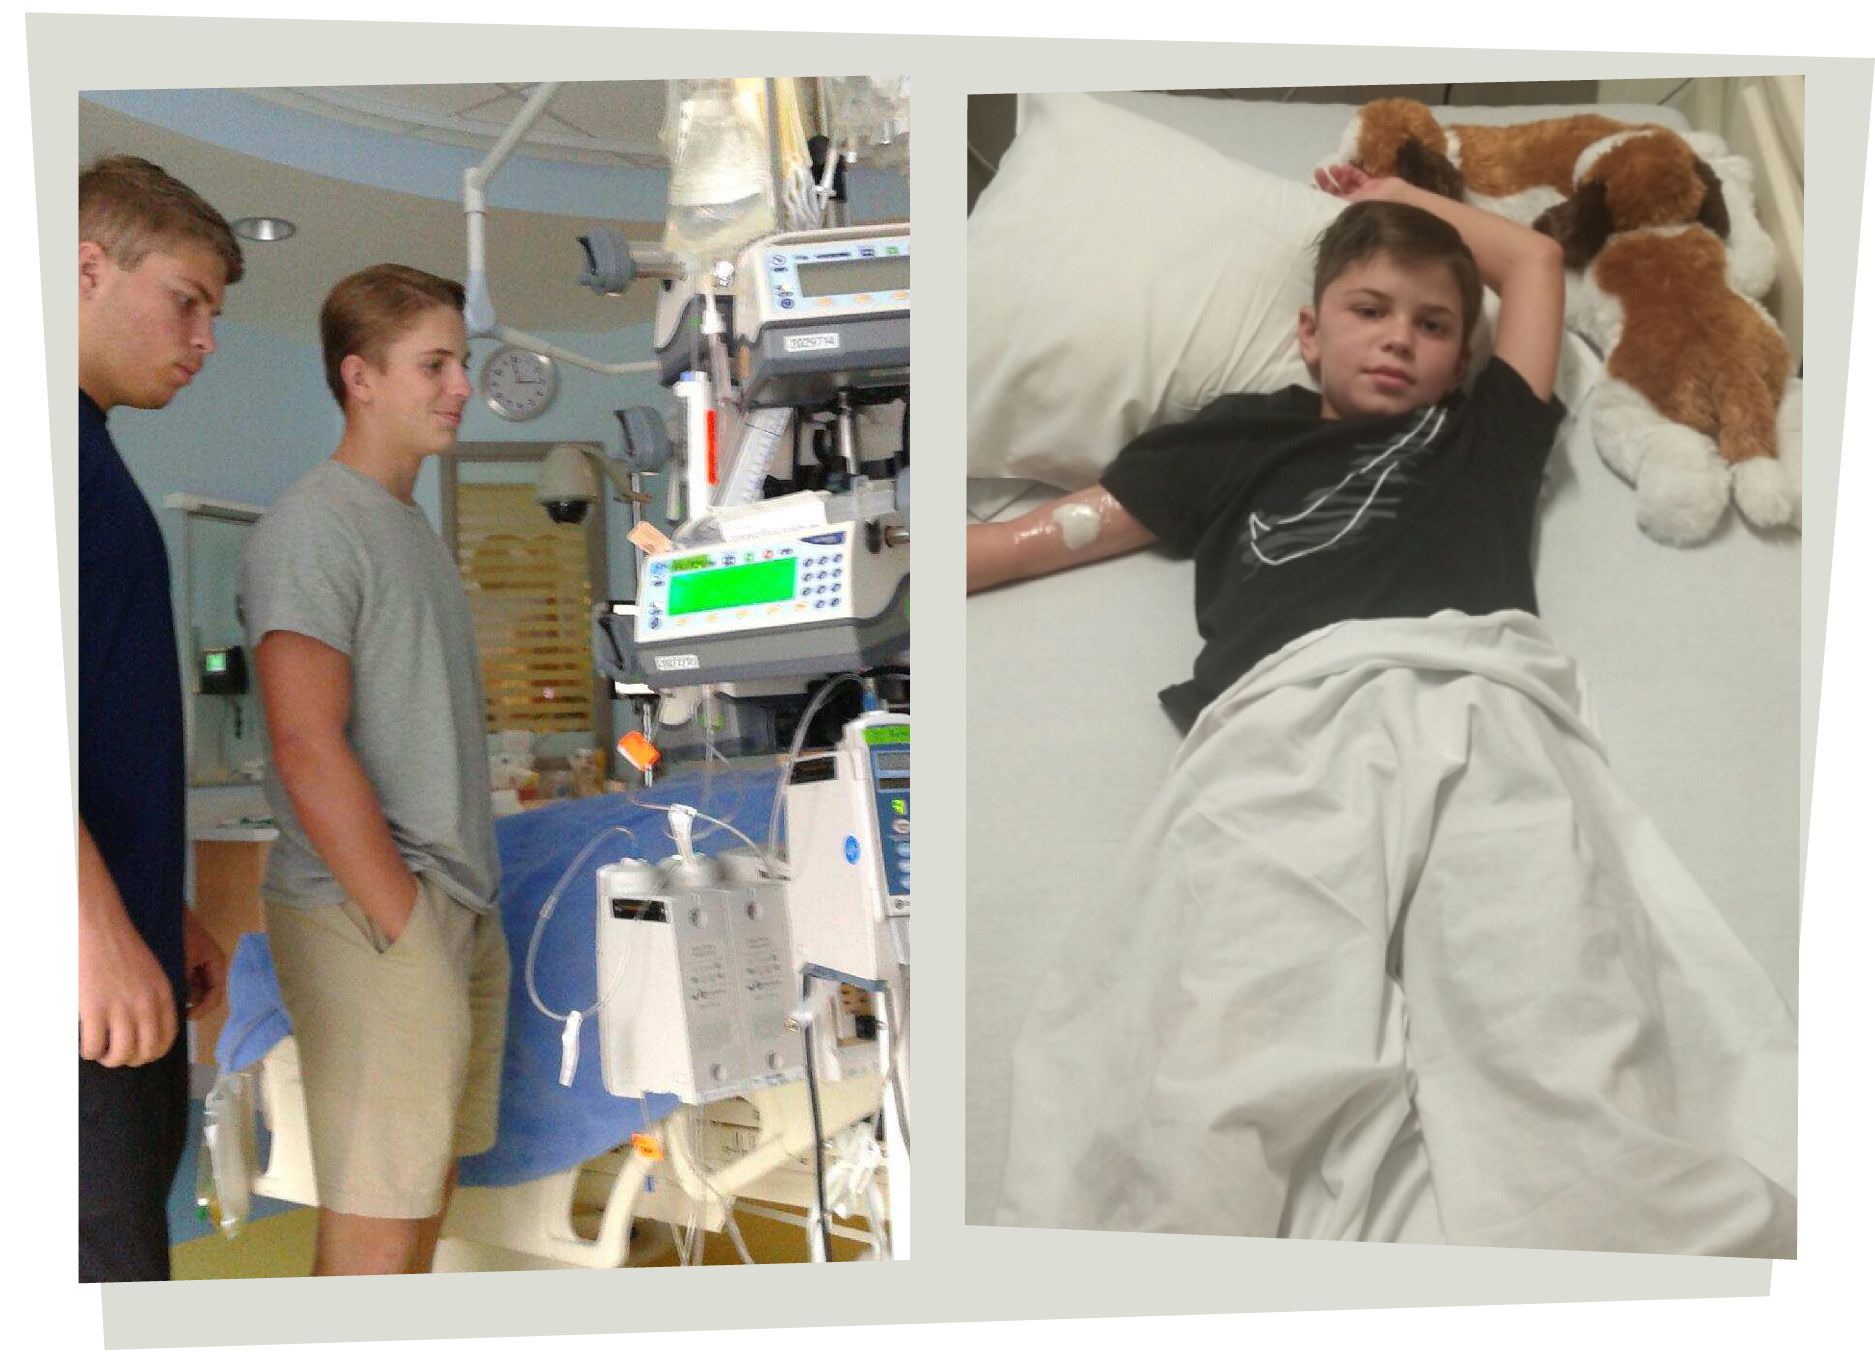 Brayden's older brothers Zach and Justin stand by his bed in the hospital; a photo of Brayden in bed with two stuffed animals to keep him company during recovery.